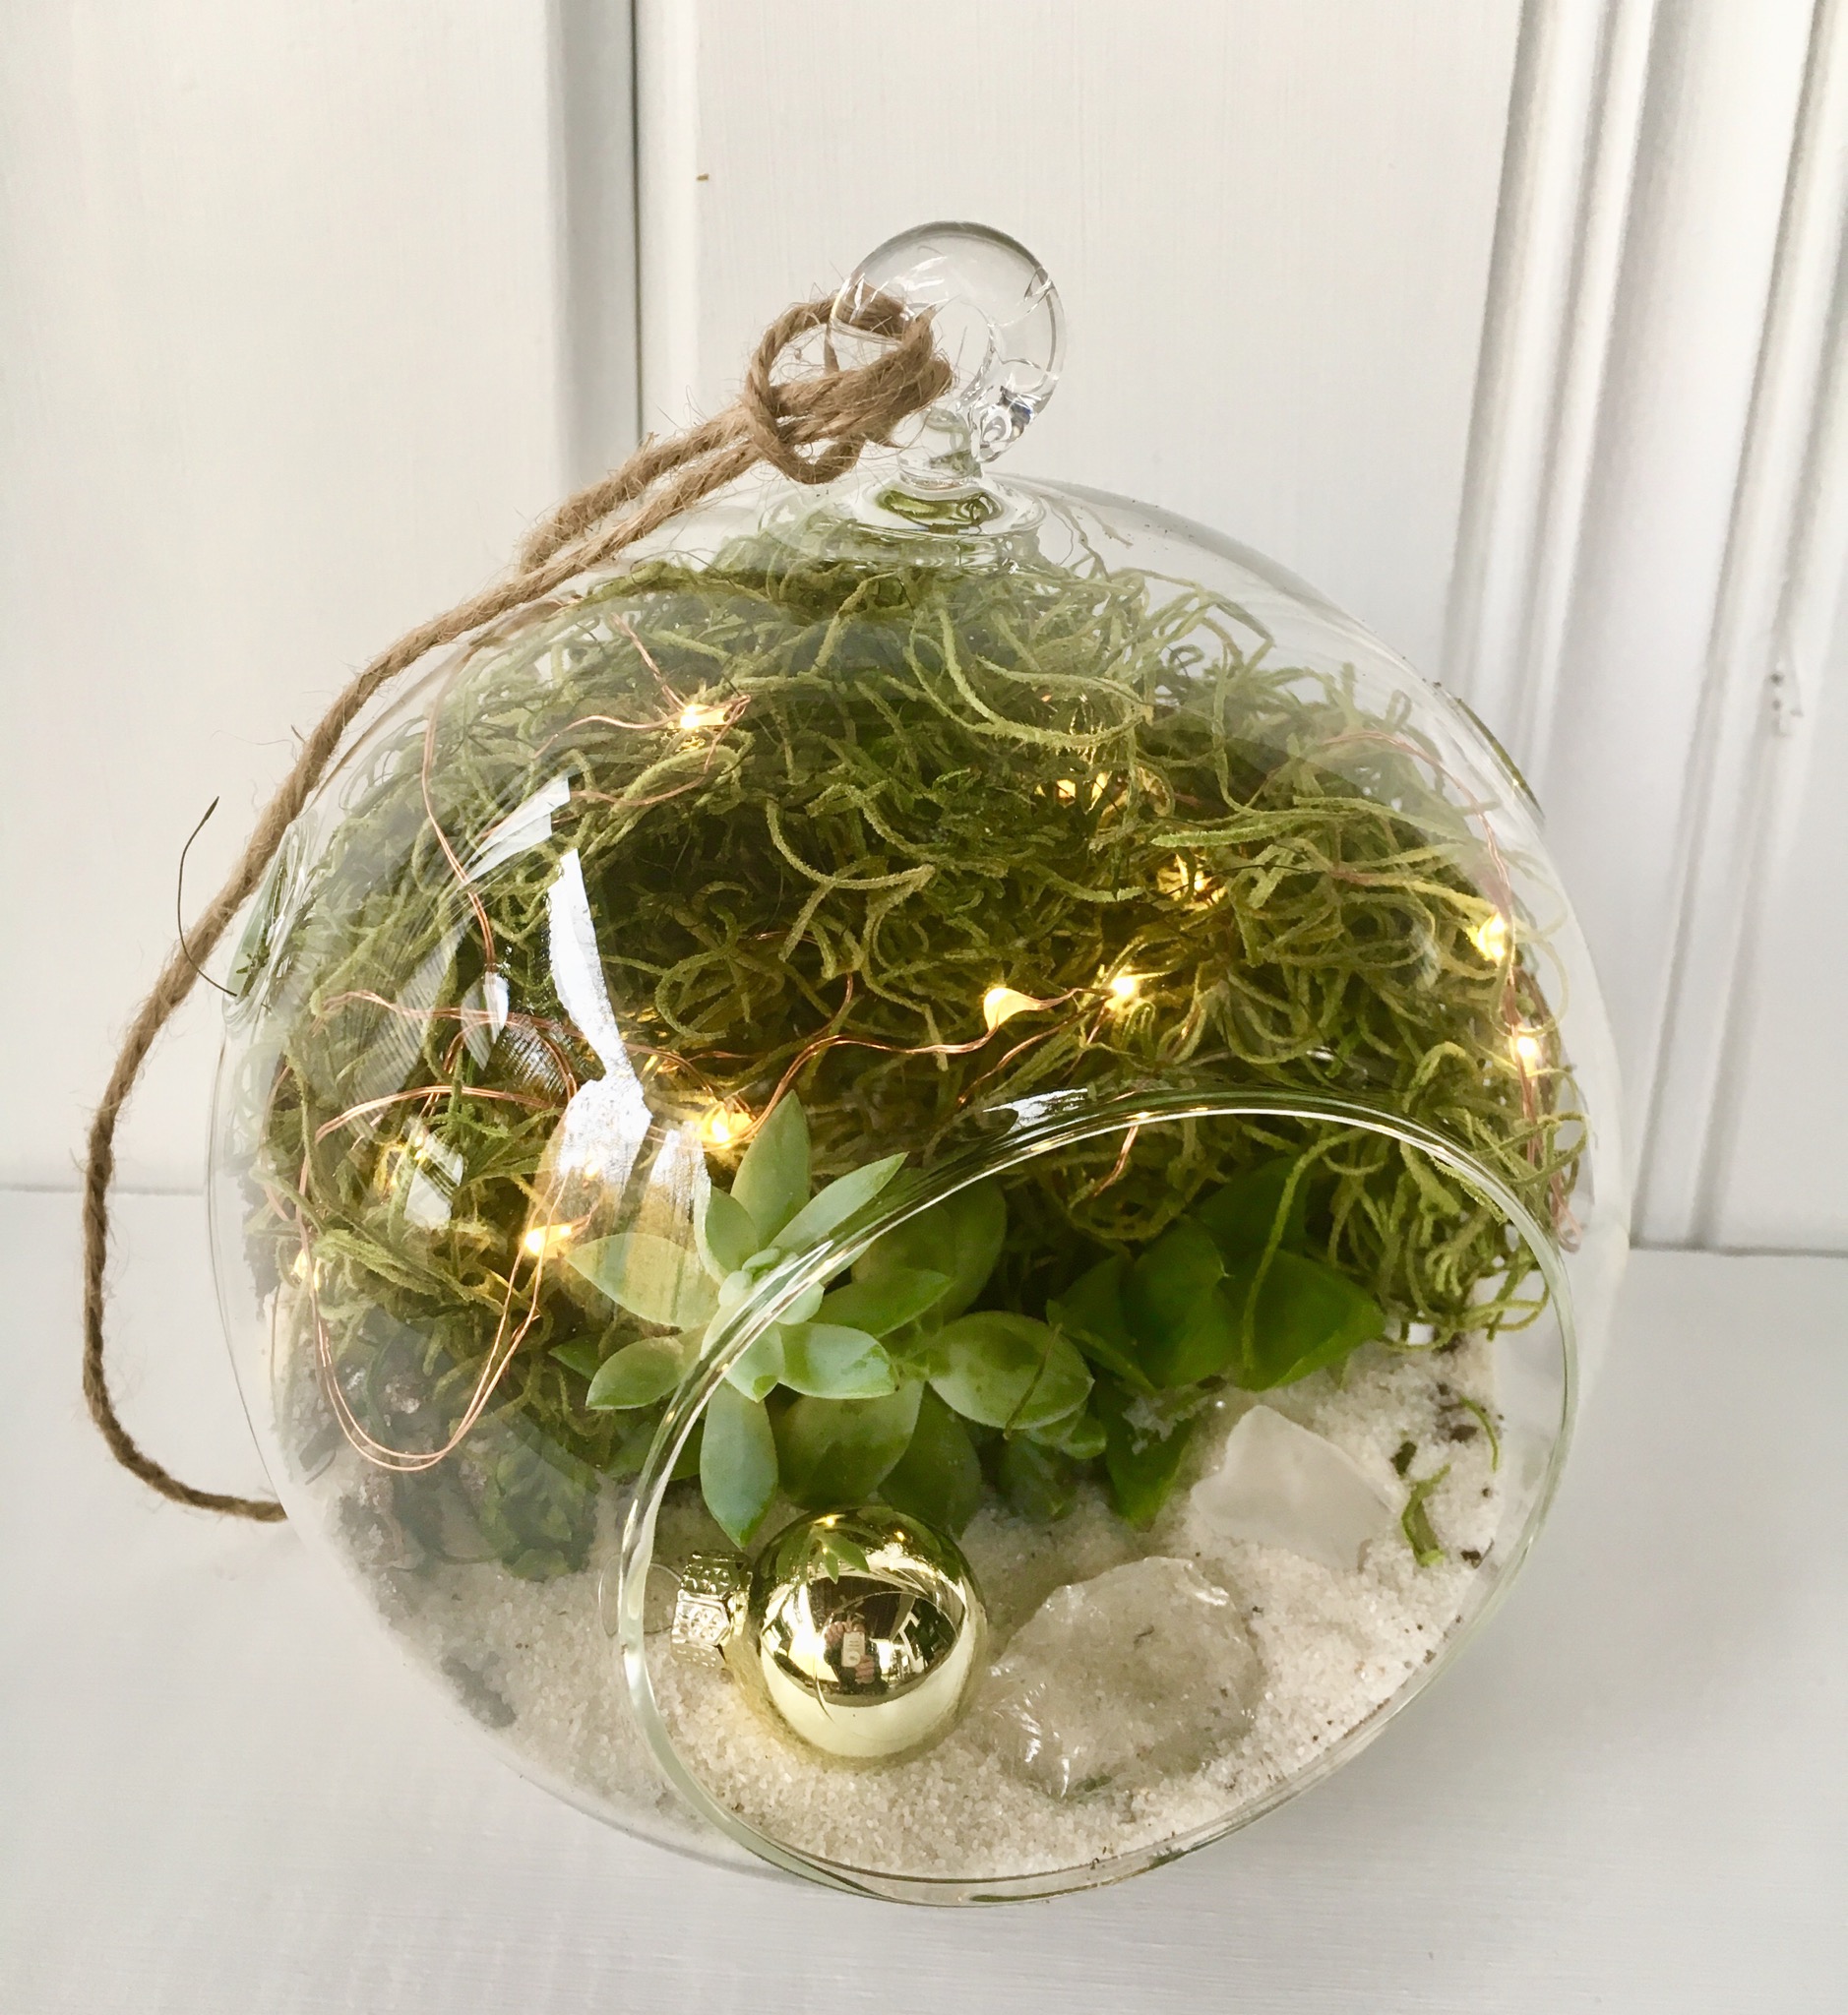 A Hanging Globe Succulent Terrarium w Fairy Lights  Ornament plant nite project by Yaymaker